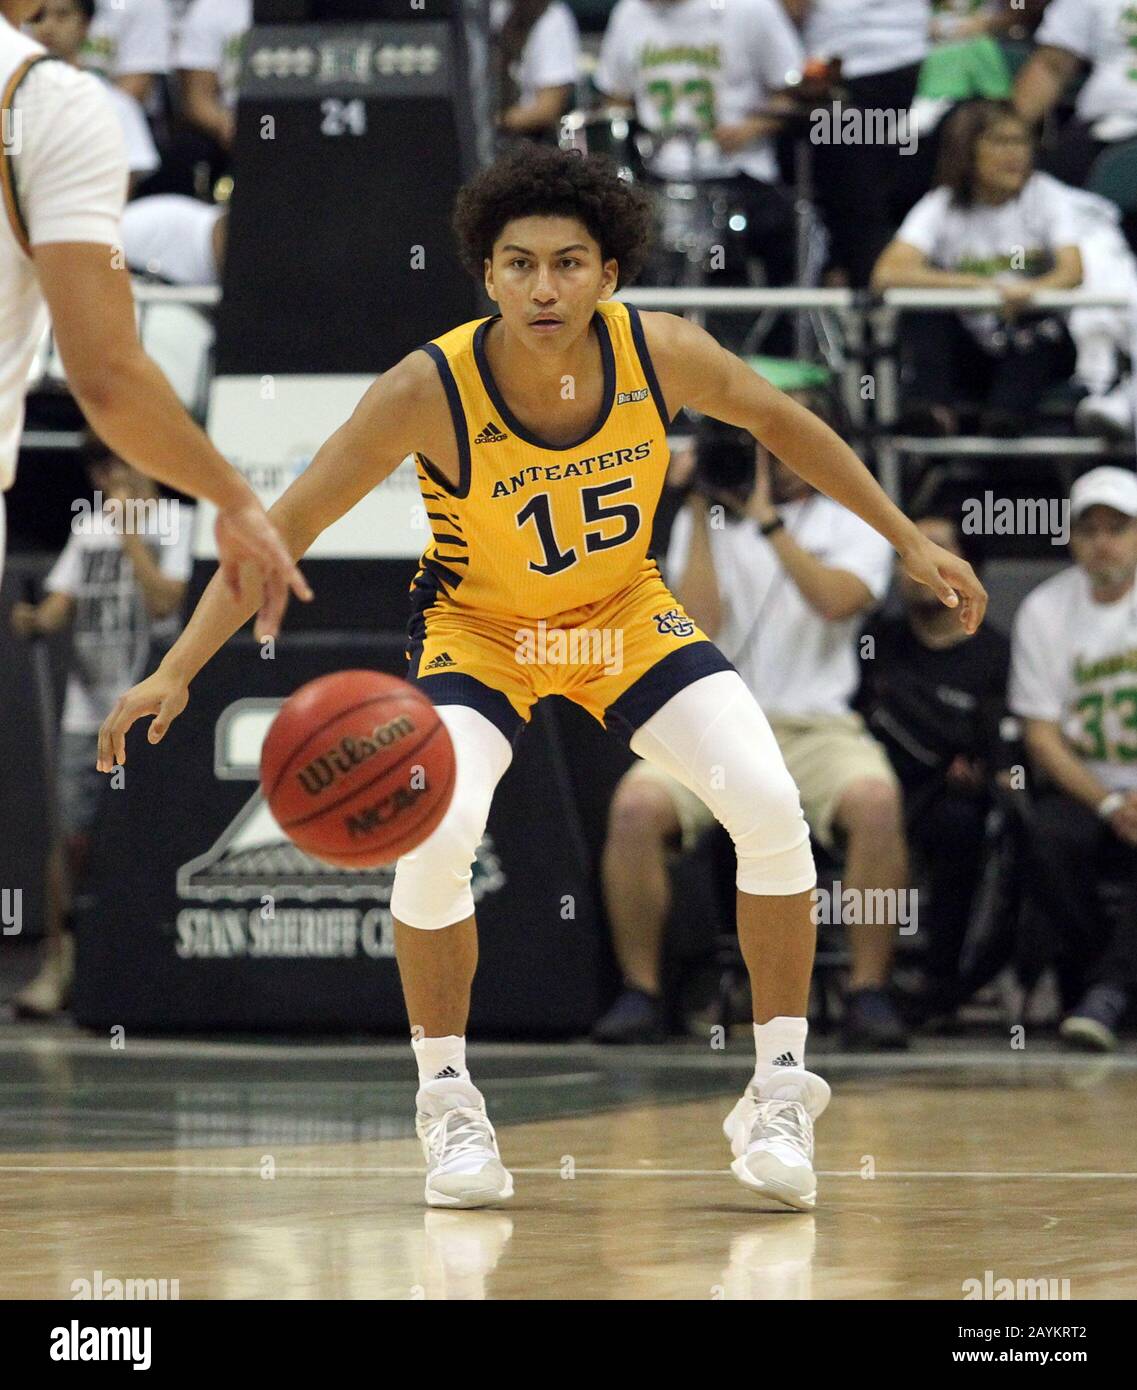 February 15, 2020 - UC Irvine Anteaters guard Jeron Artest (15) defends during a game between the UC Irvine Anteaters and the Hawaii Rainbow Warriors at the Stan Sheriff Center in Honolulu, HI - Michael Sullivan/CSM Stock Photo